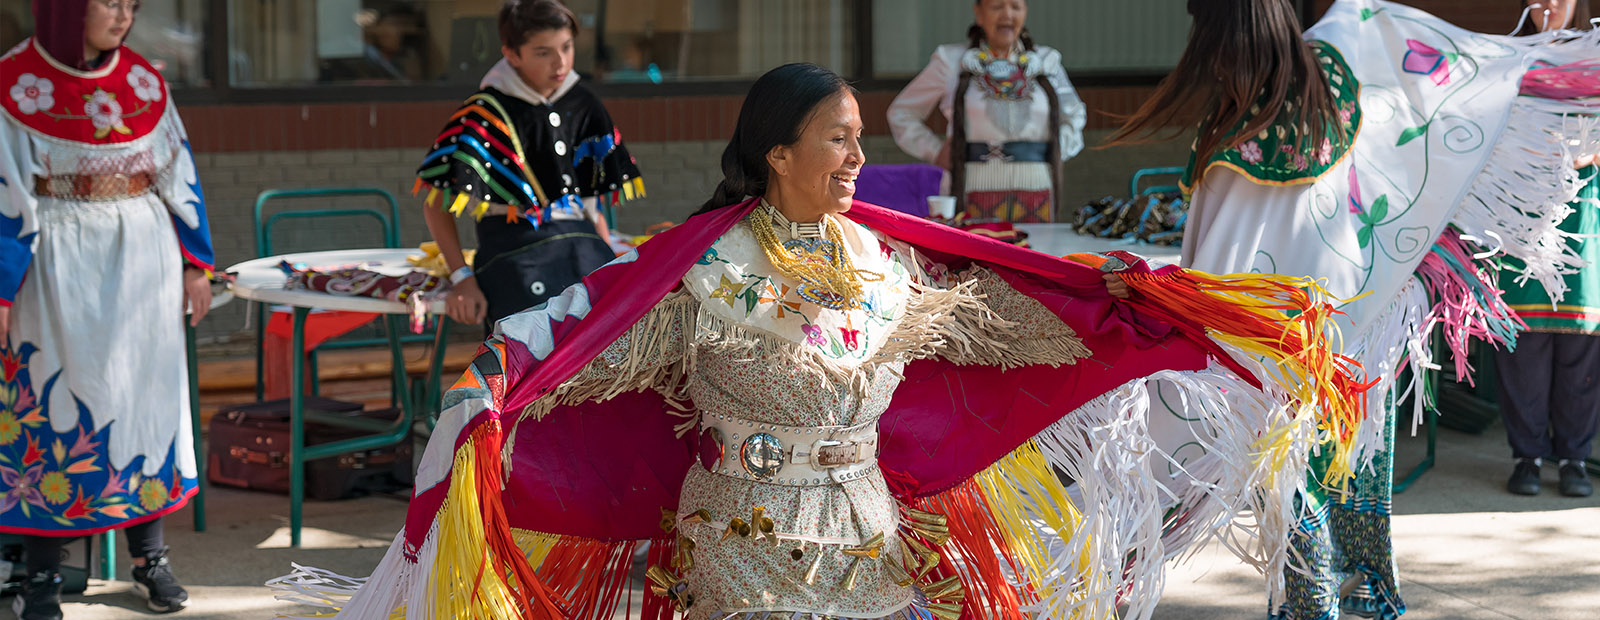 Indigenous dancers share their culture at an event on campus